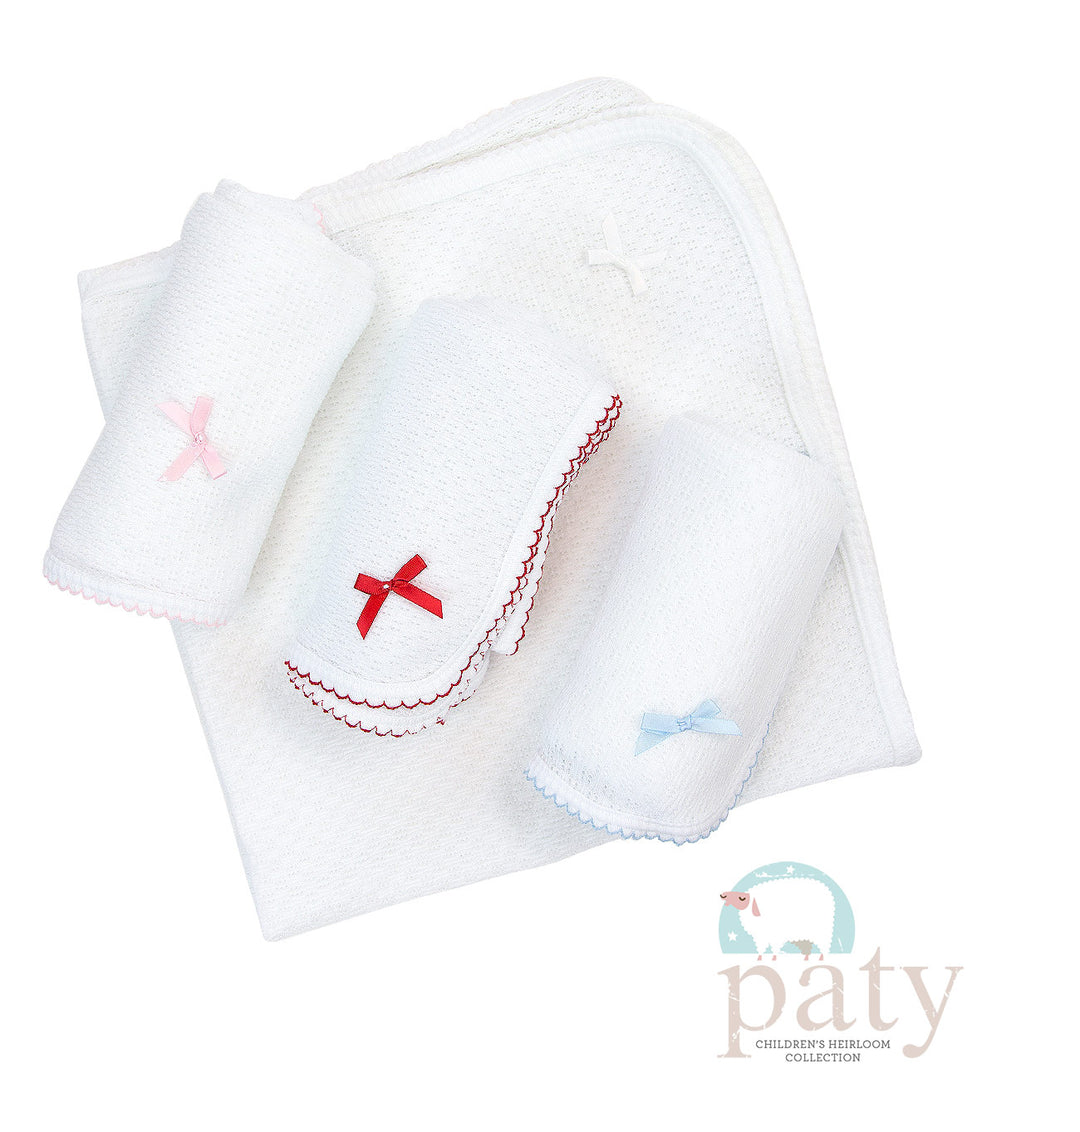 Paty White Swaddle Blanket